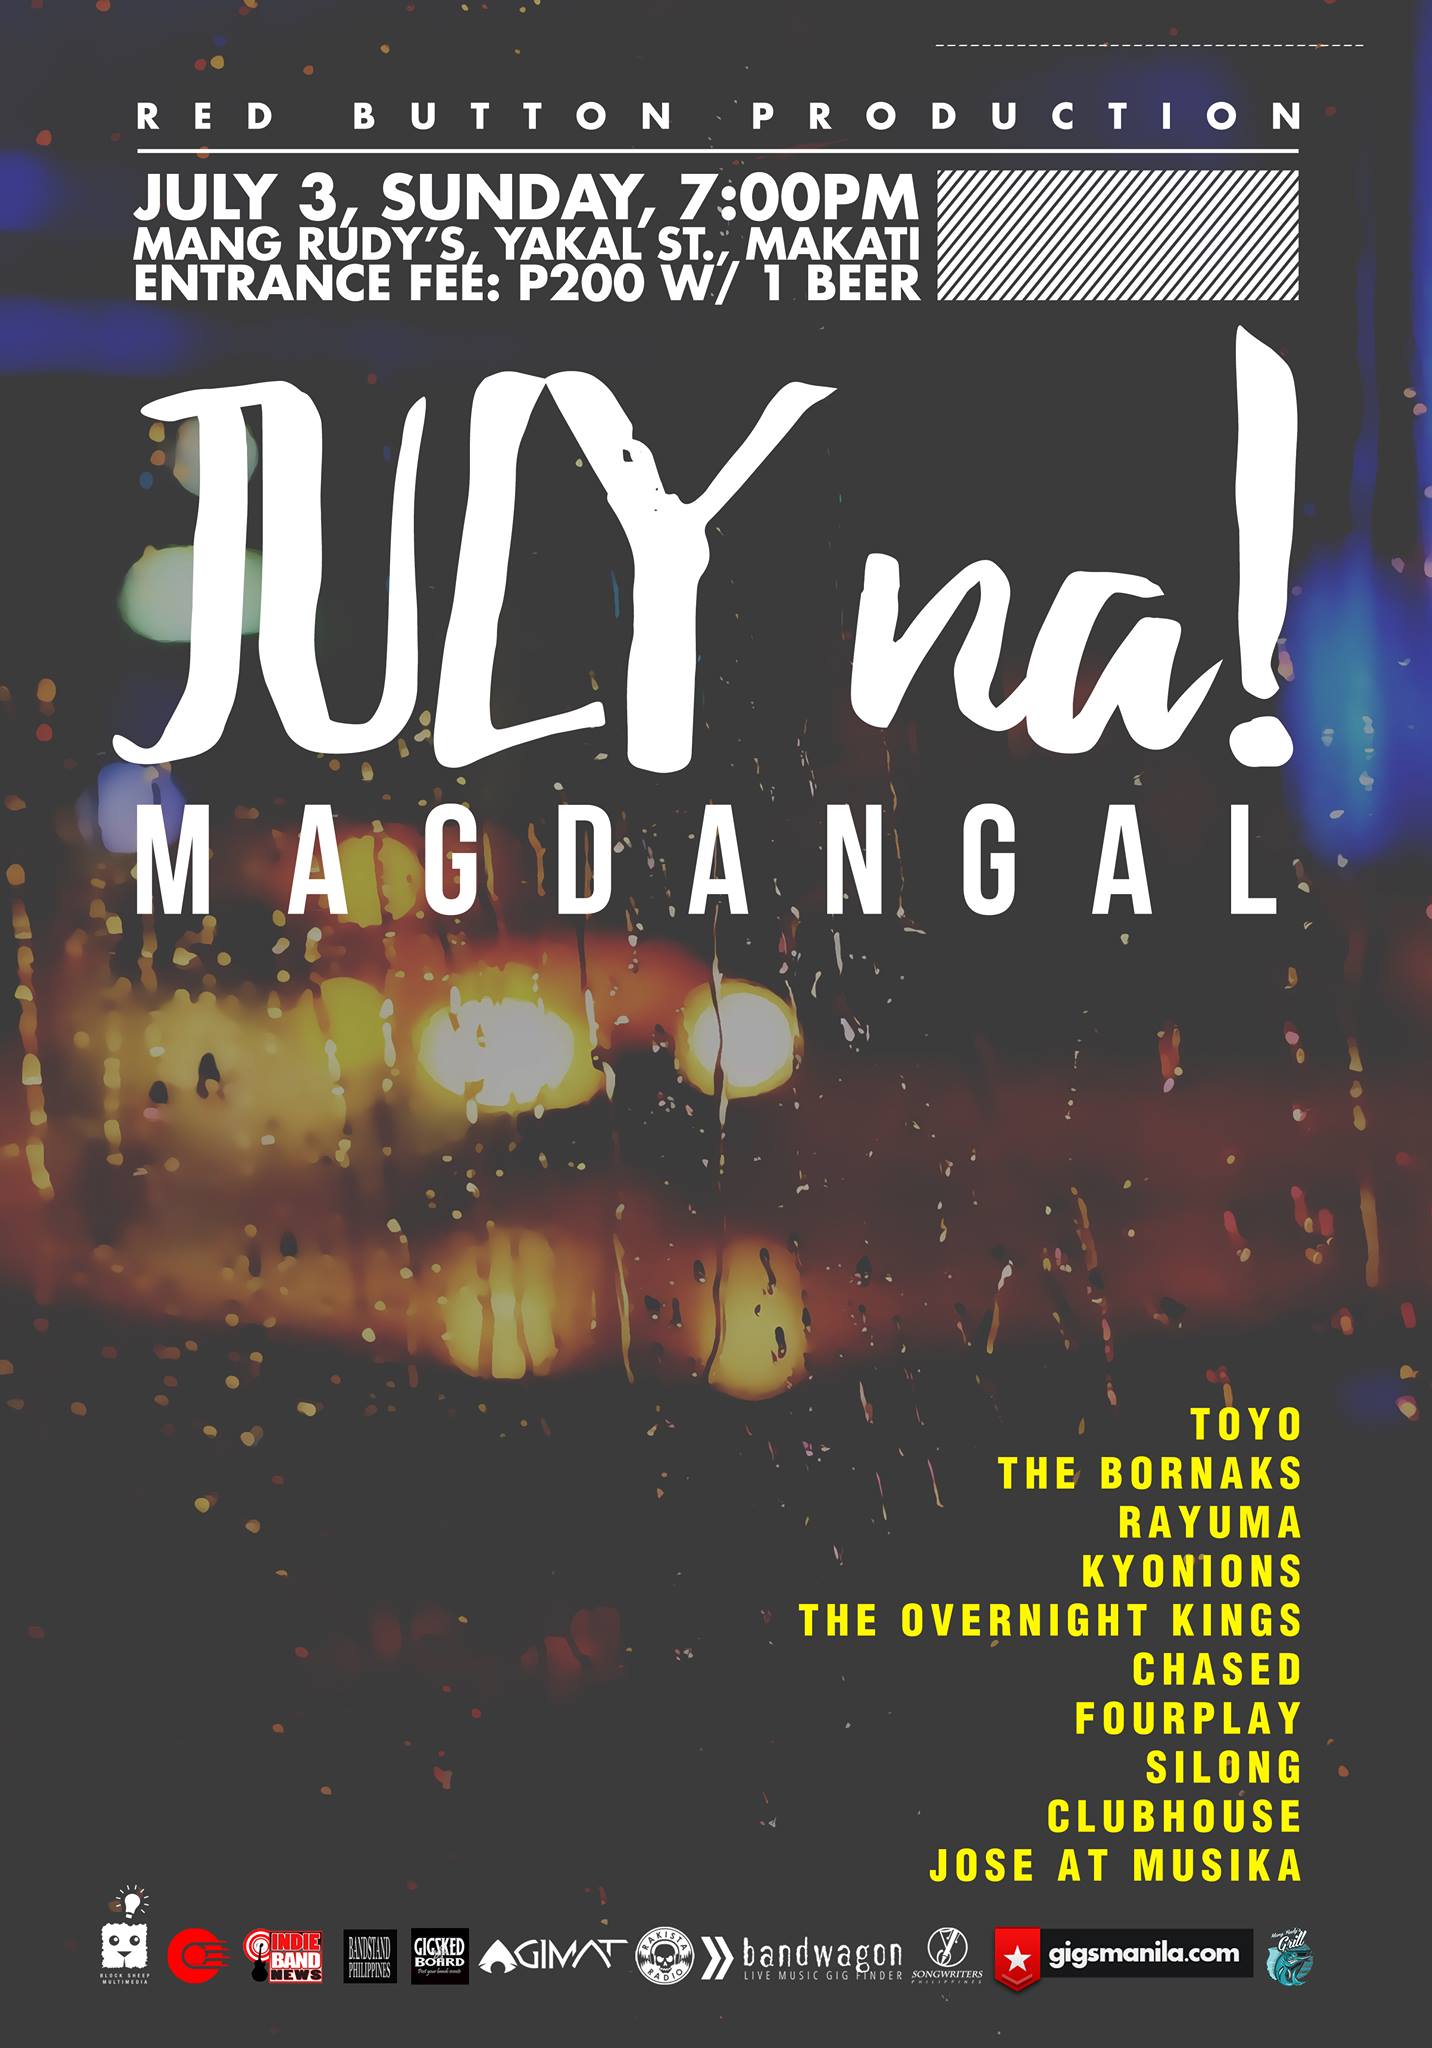 July na! Magdangal clock Sunday at 6 PM - 1 AM Jul 3 at 6 PM to Jul 4 at 1 AM pin Show Map Mang Rudy's Tuna Grill And Papaitan 148 A Yakal Street San Antonio Village, 1230 Makati, Philippines feed-solid Subscribed to Red Button Production's events About Discussion Write Post Add Photo / Video Create Poll Details Red Button Production presents "July na Magdangal" July 3, Sunday | 7:00PM Mang Rudy's Yakal St., Makati Entrance Fee: P200 w/ 1 Beer performances by: Chased Kyonions Rayuma The Bornaks The Overnight Kings Toyo FourPlay Jose at Musika Clubhouse Silong